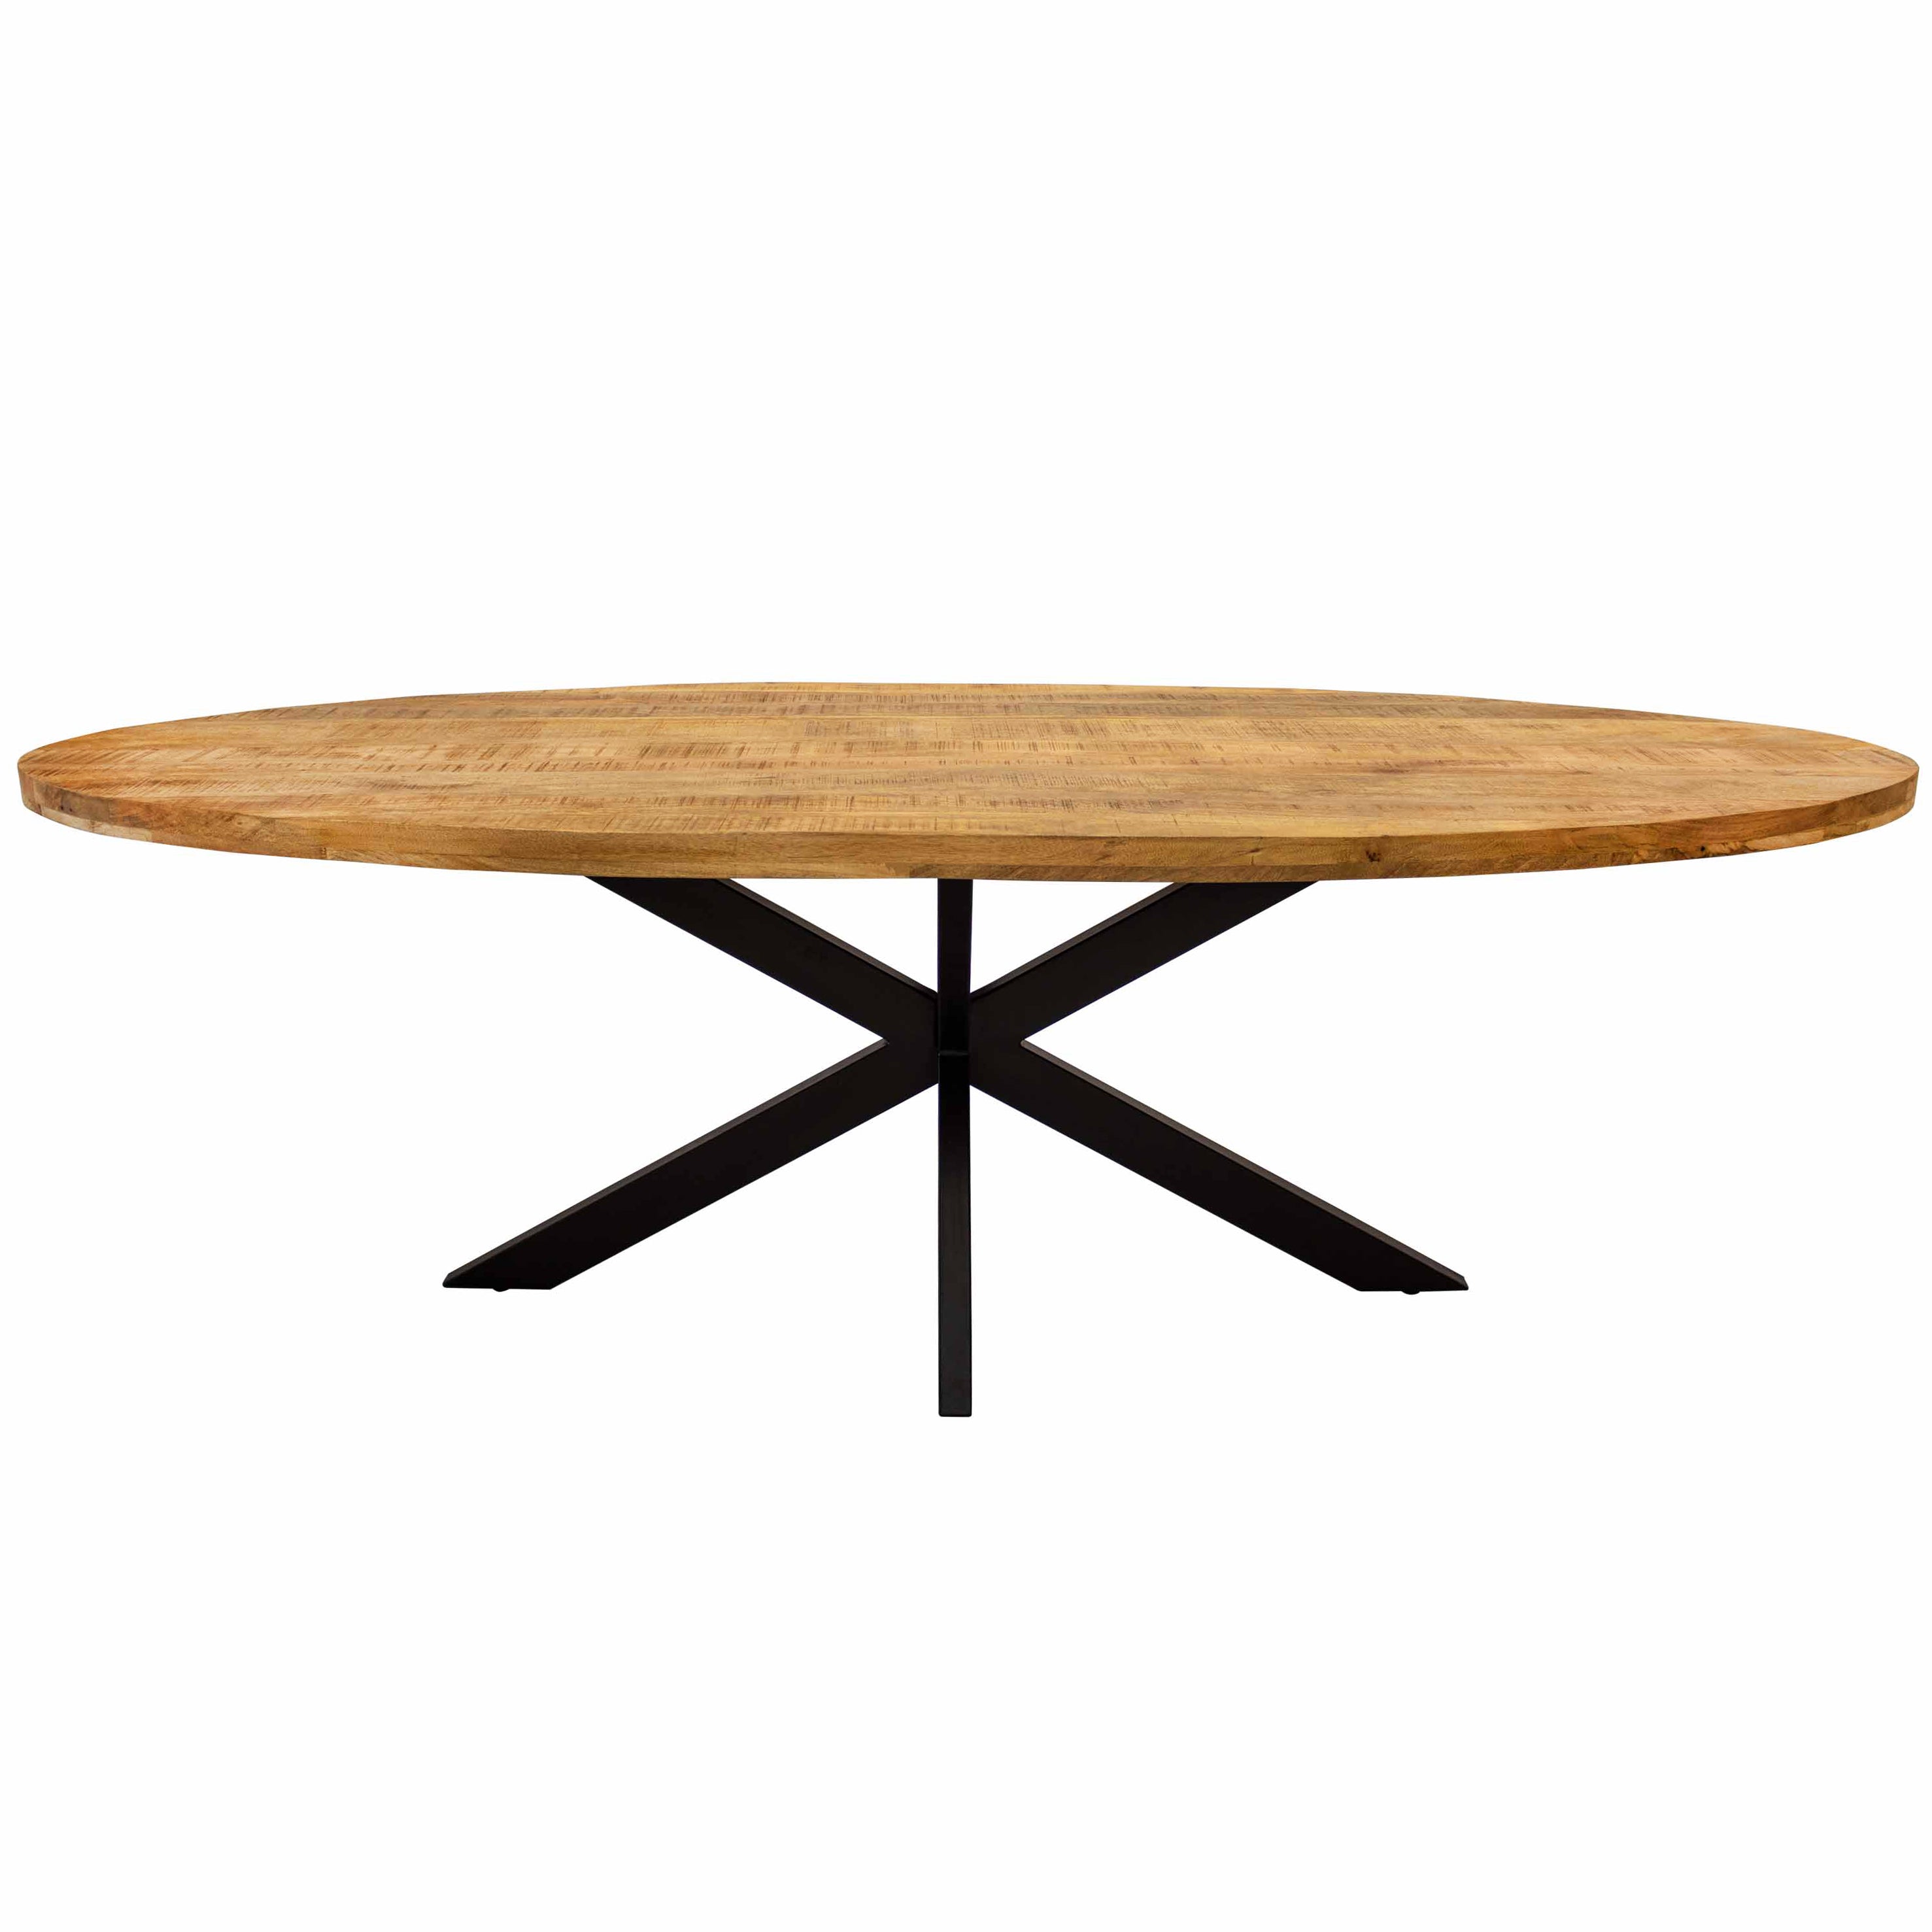 Kick dining table Dax oval - 240cm